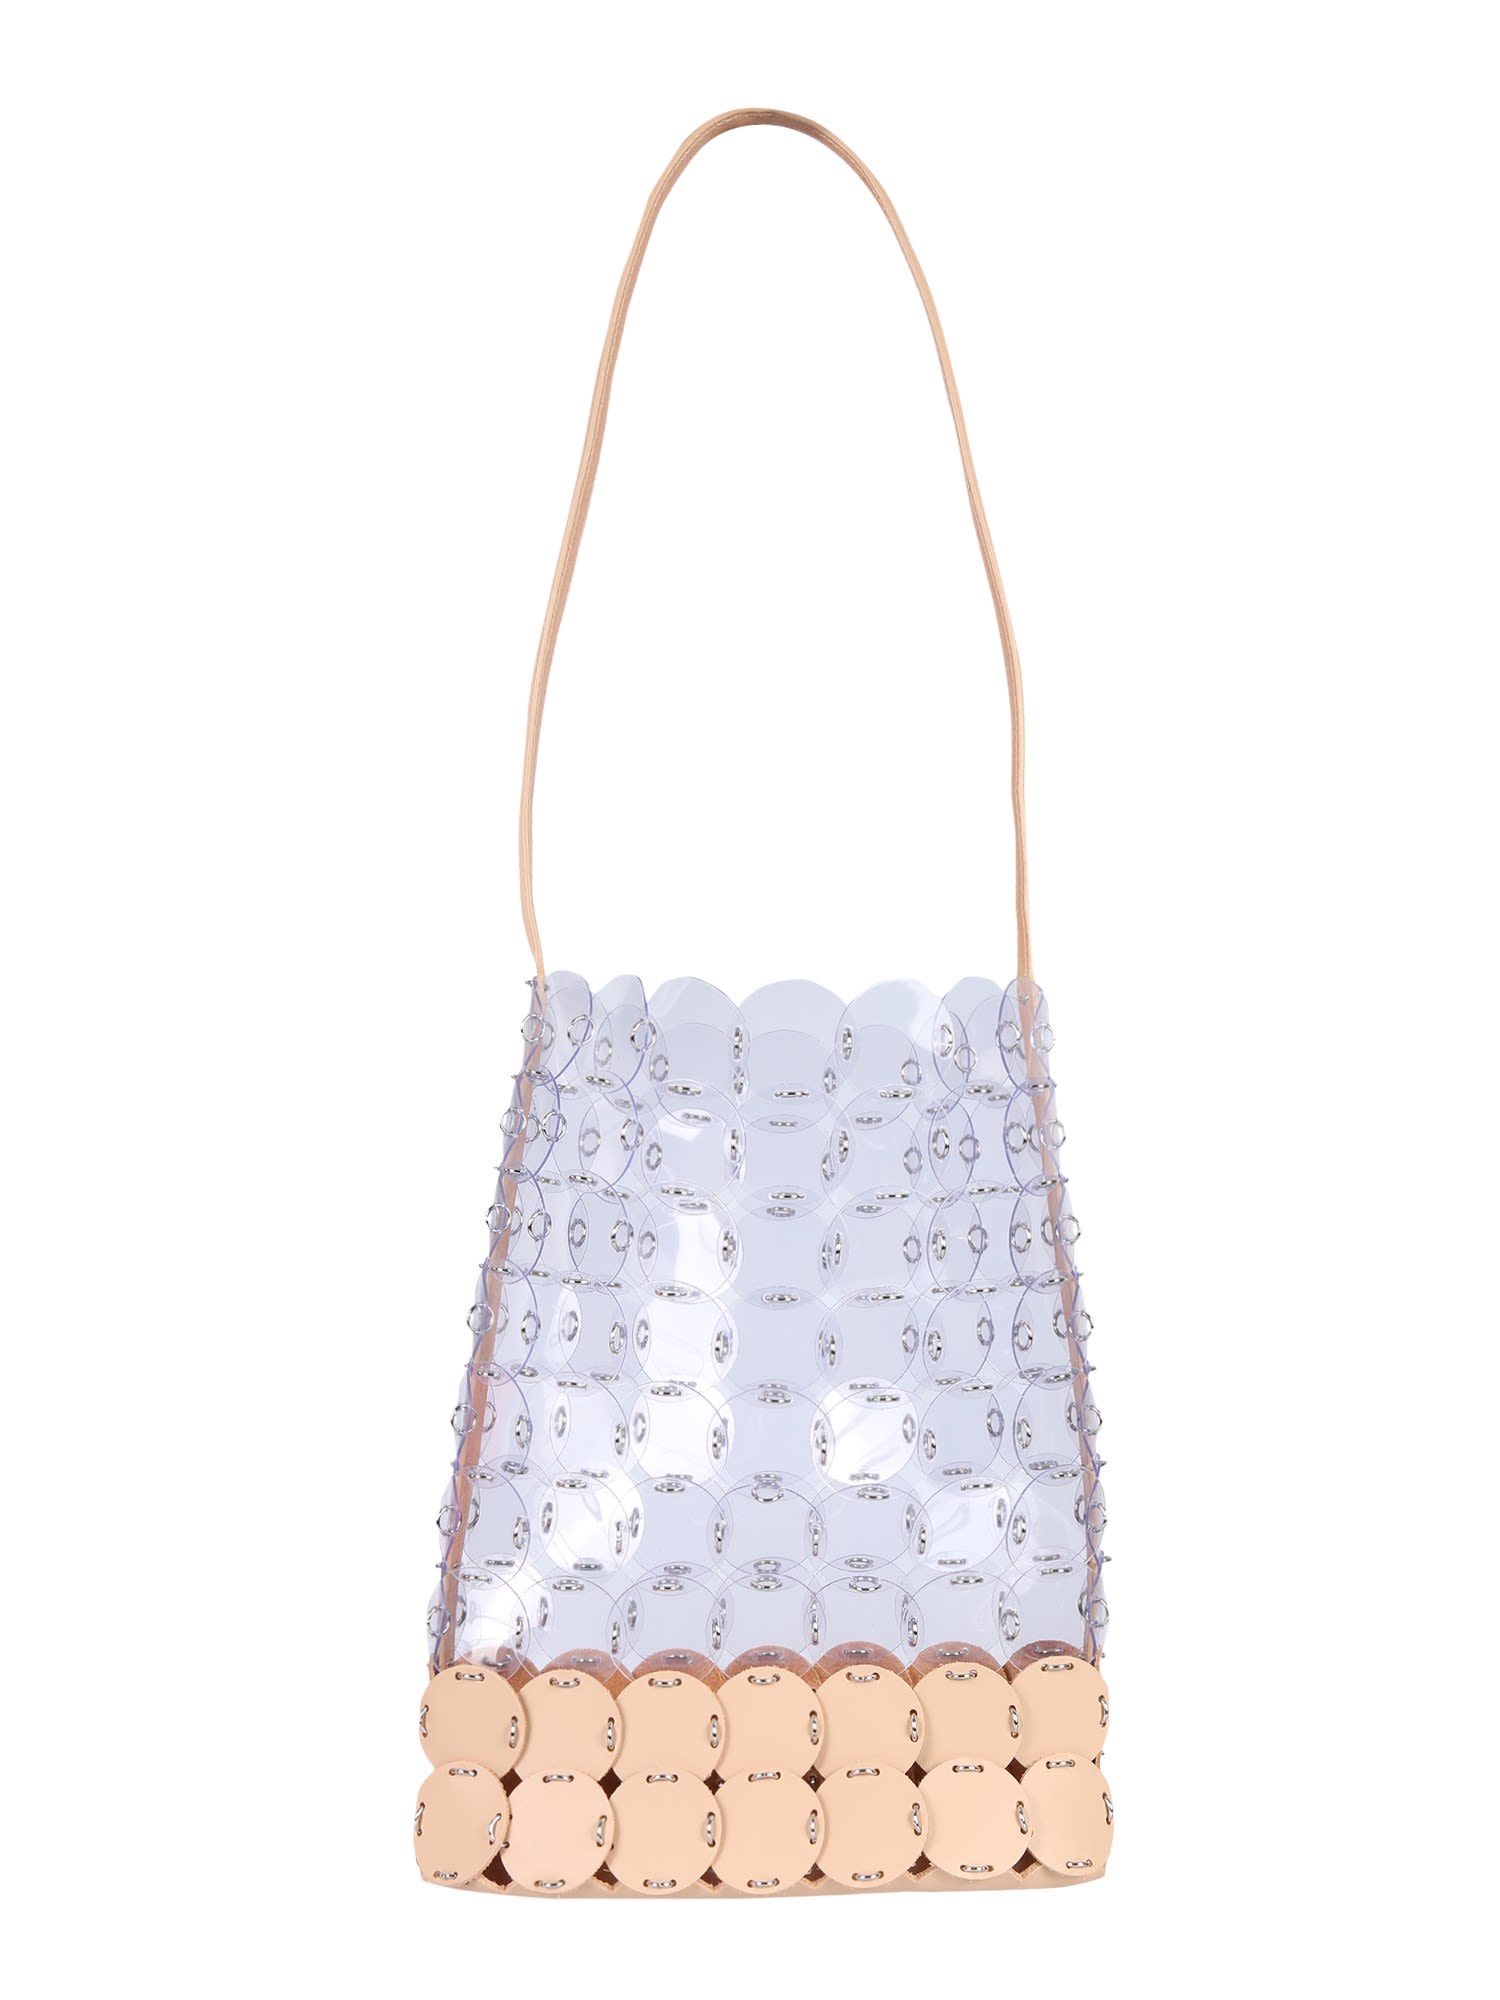 Paco Rabanne Hobo Bag With Transparent Discs